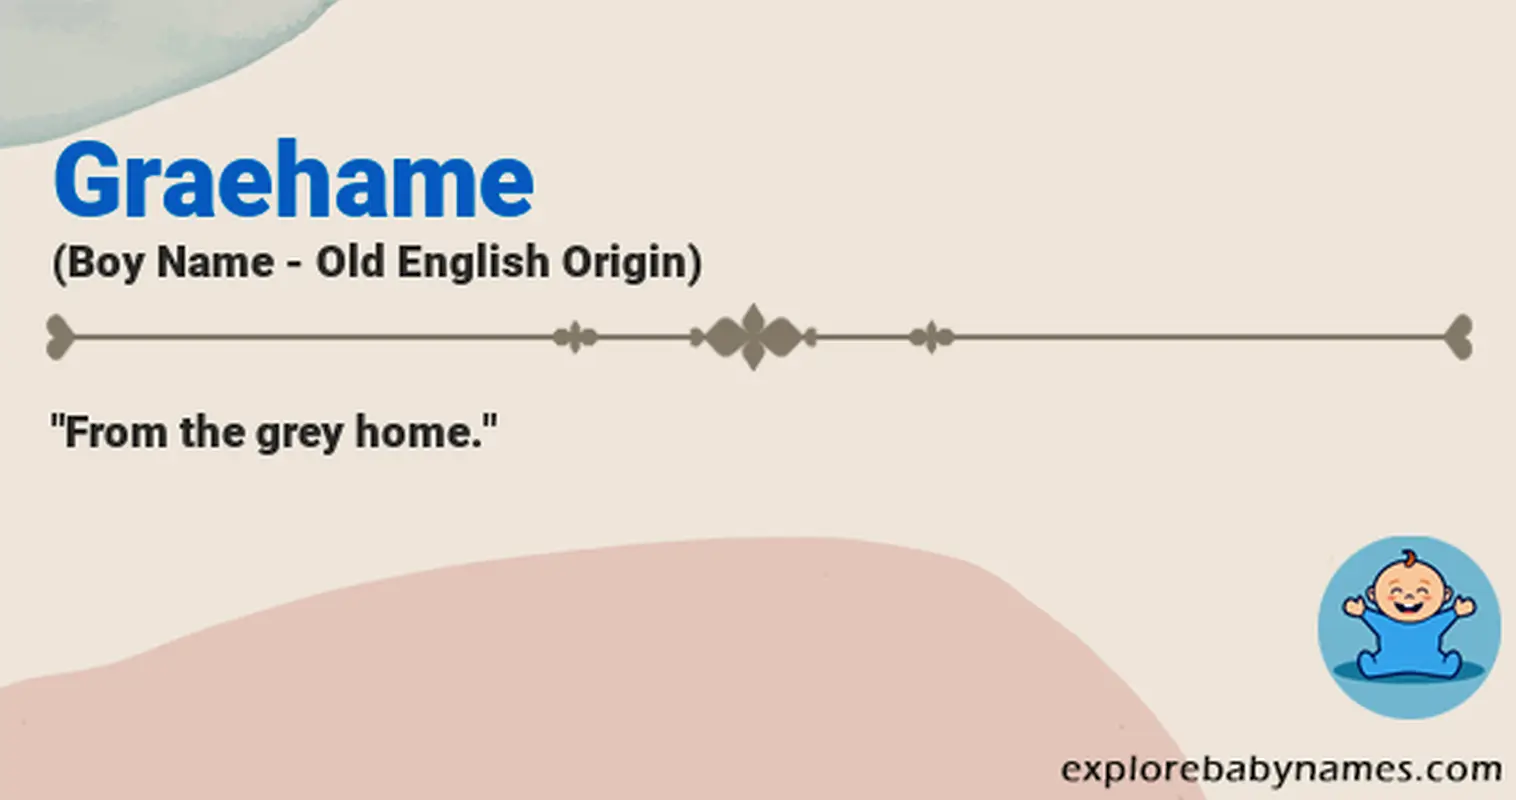 Meaning of Graehame